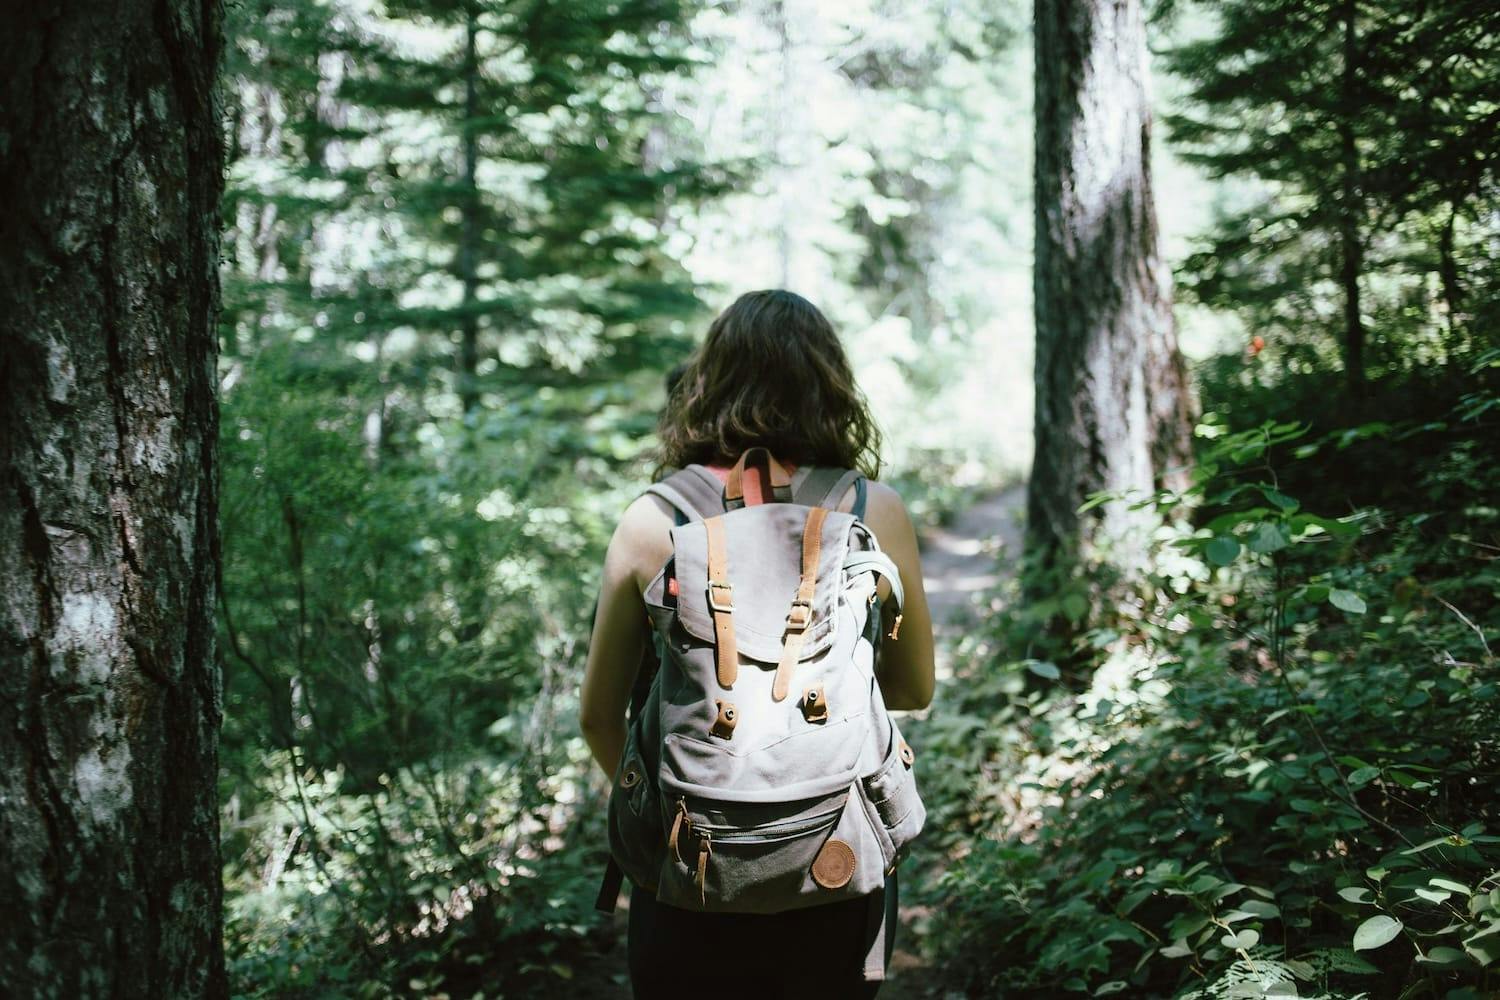 Image shows a woman walking through a forest.